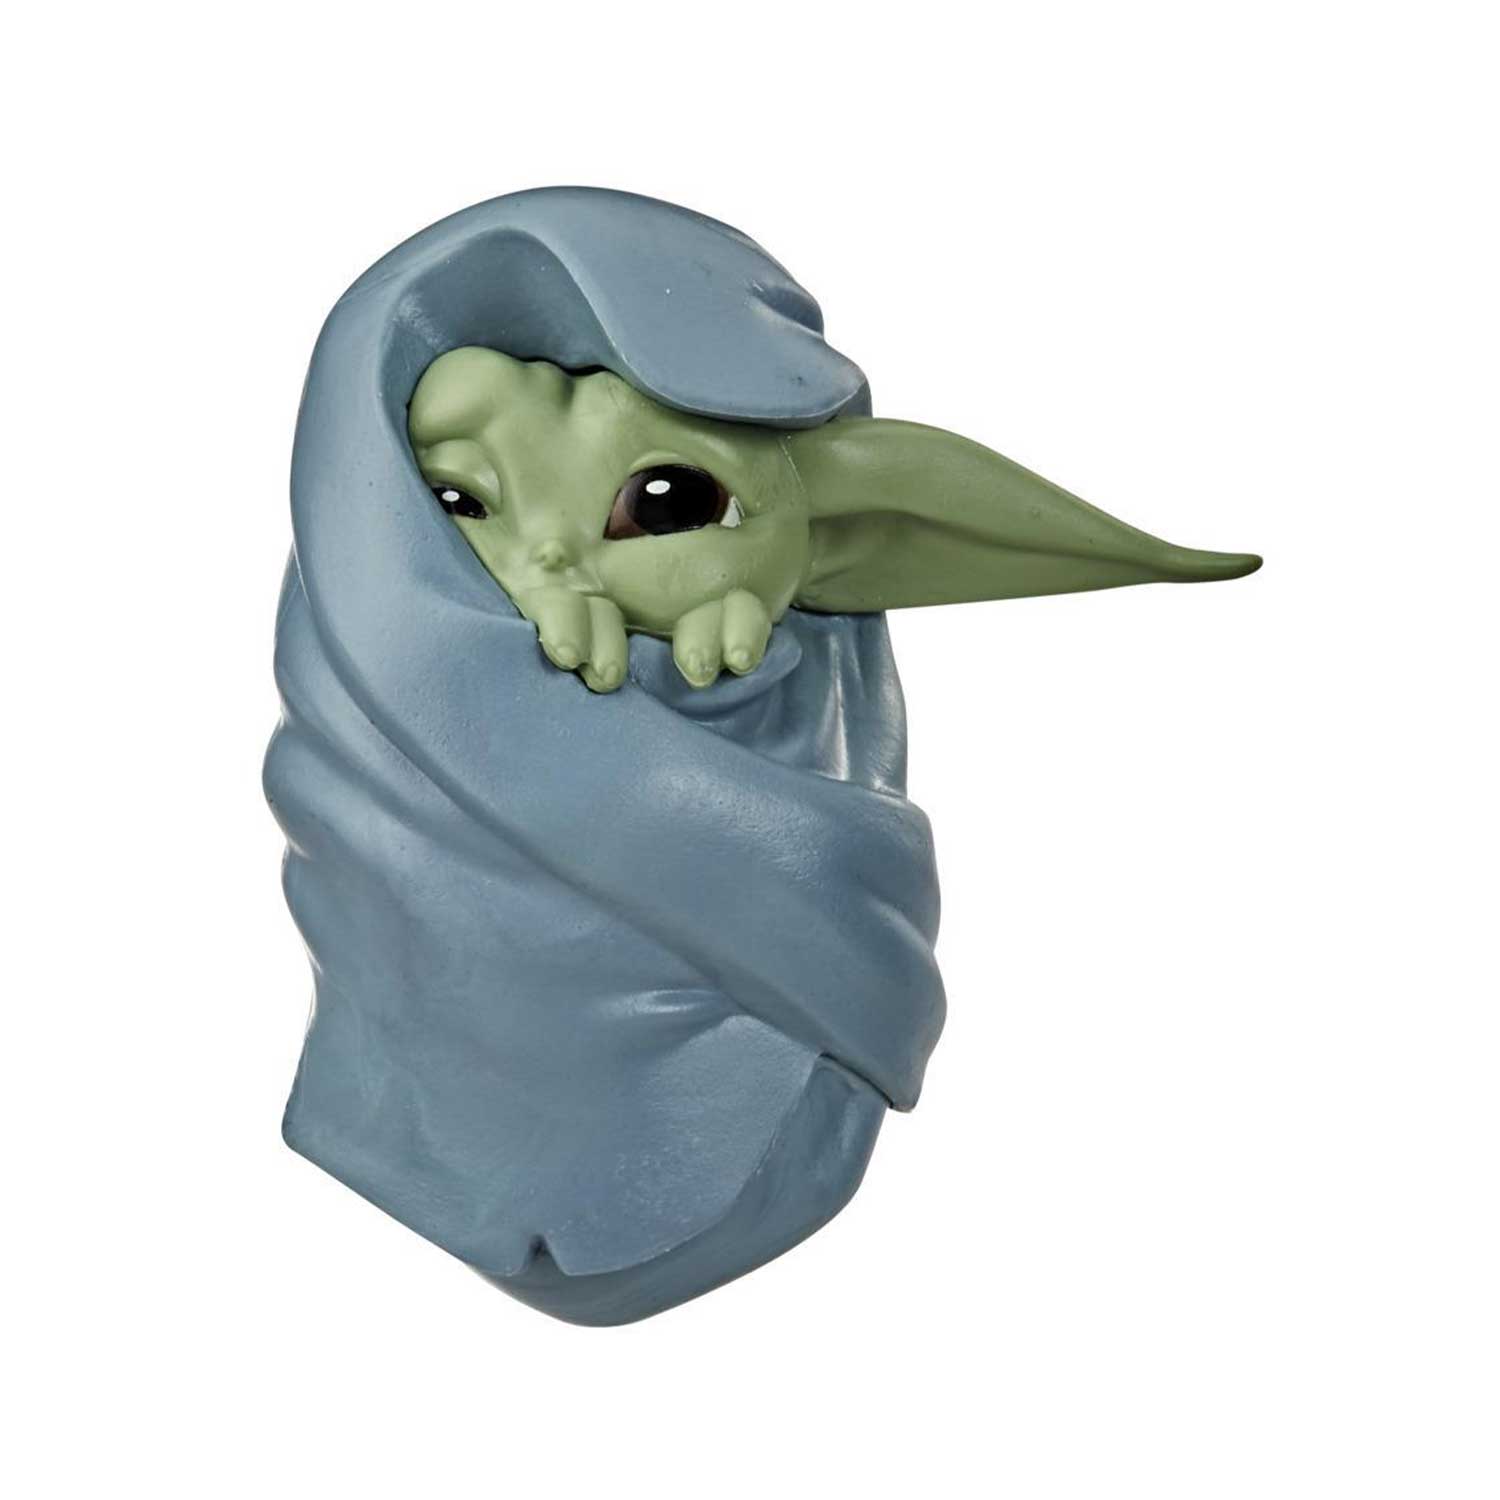 Star Wars The Bounty Collection The Child Collectible Toy 2.2-Inch The Mandalorian “Baby Yoda” Blanket-Wrapped Pose Toy - Mod: HSBF12215L0